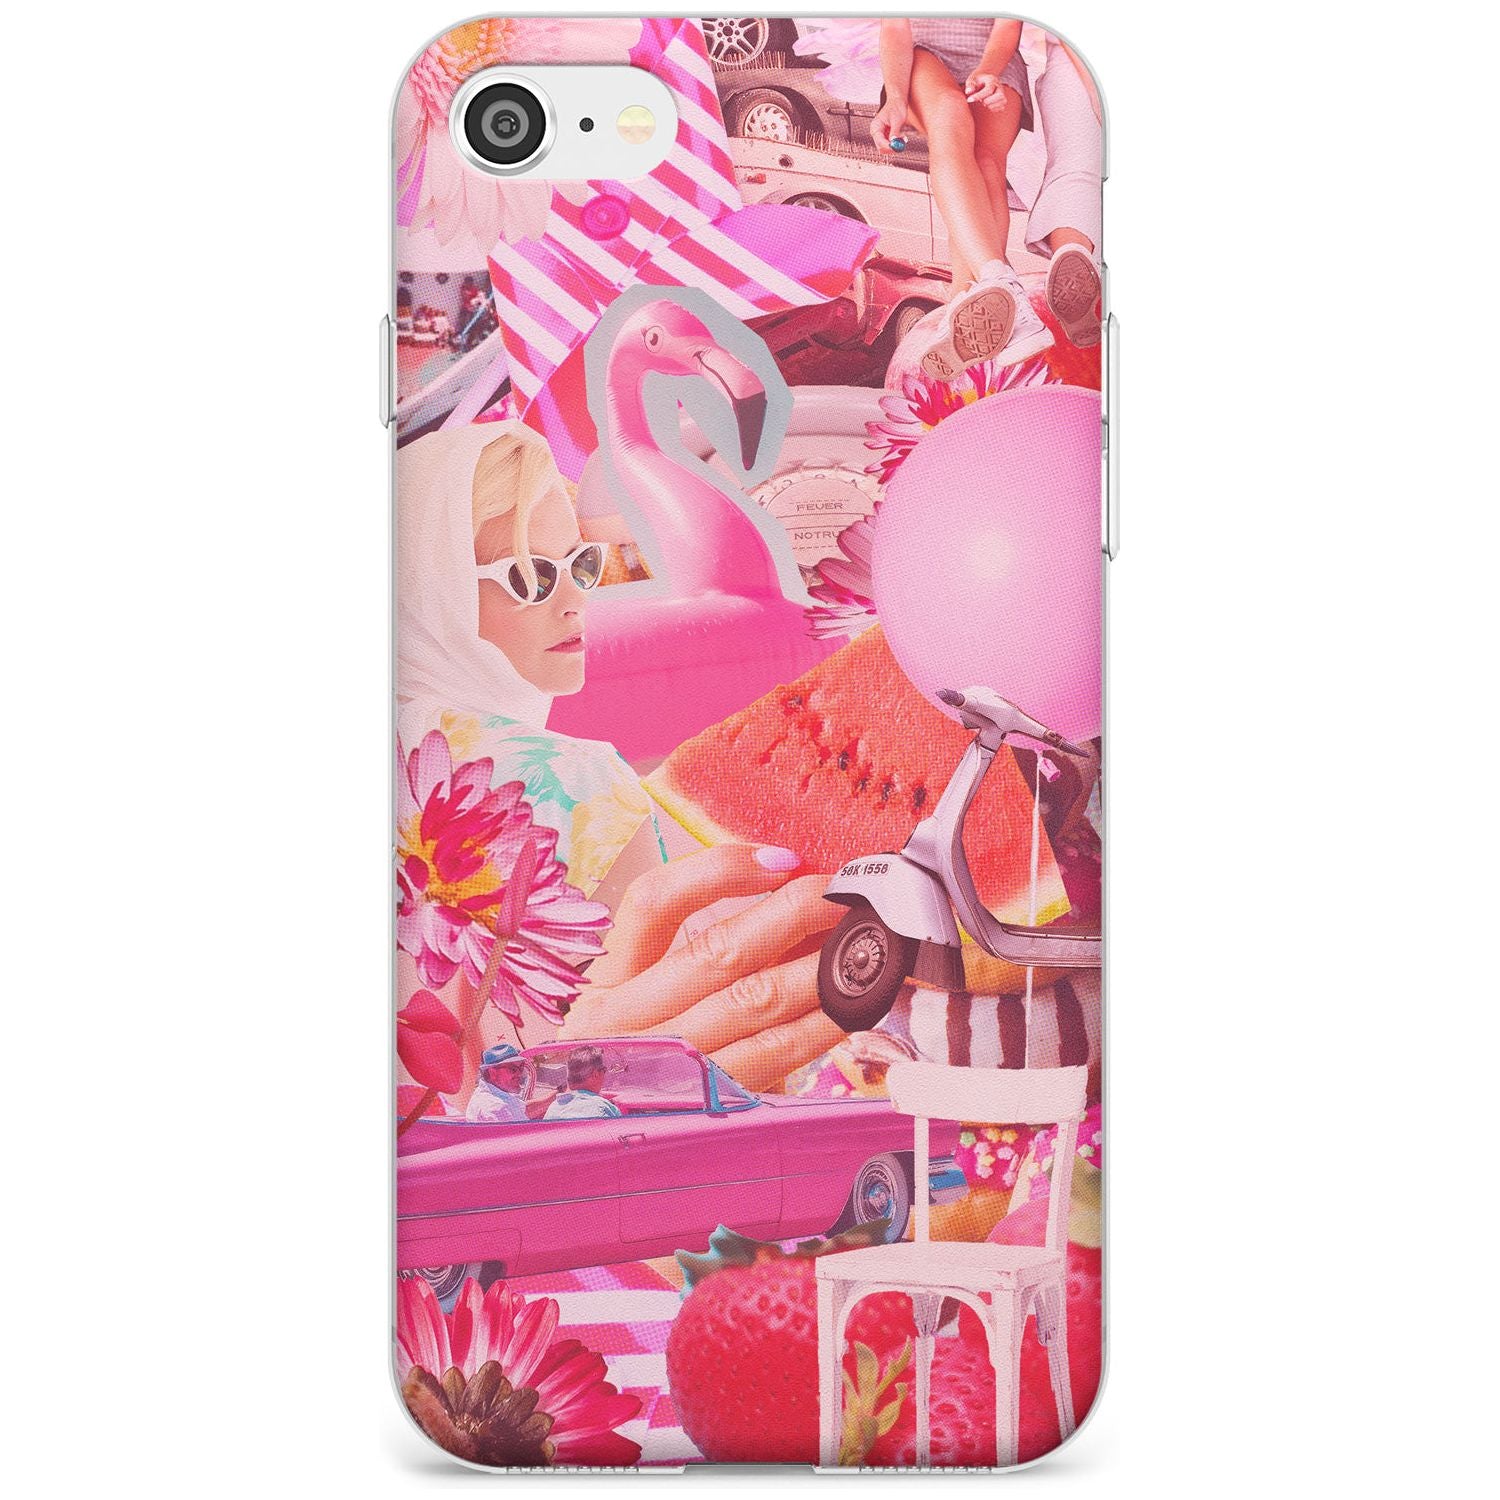 Vintage Collage: Pink Glamour Slim TPU Phone Case for iPhone SE 8 7 Plus